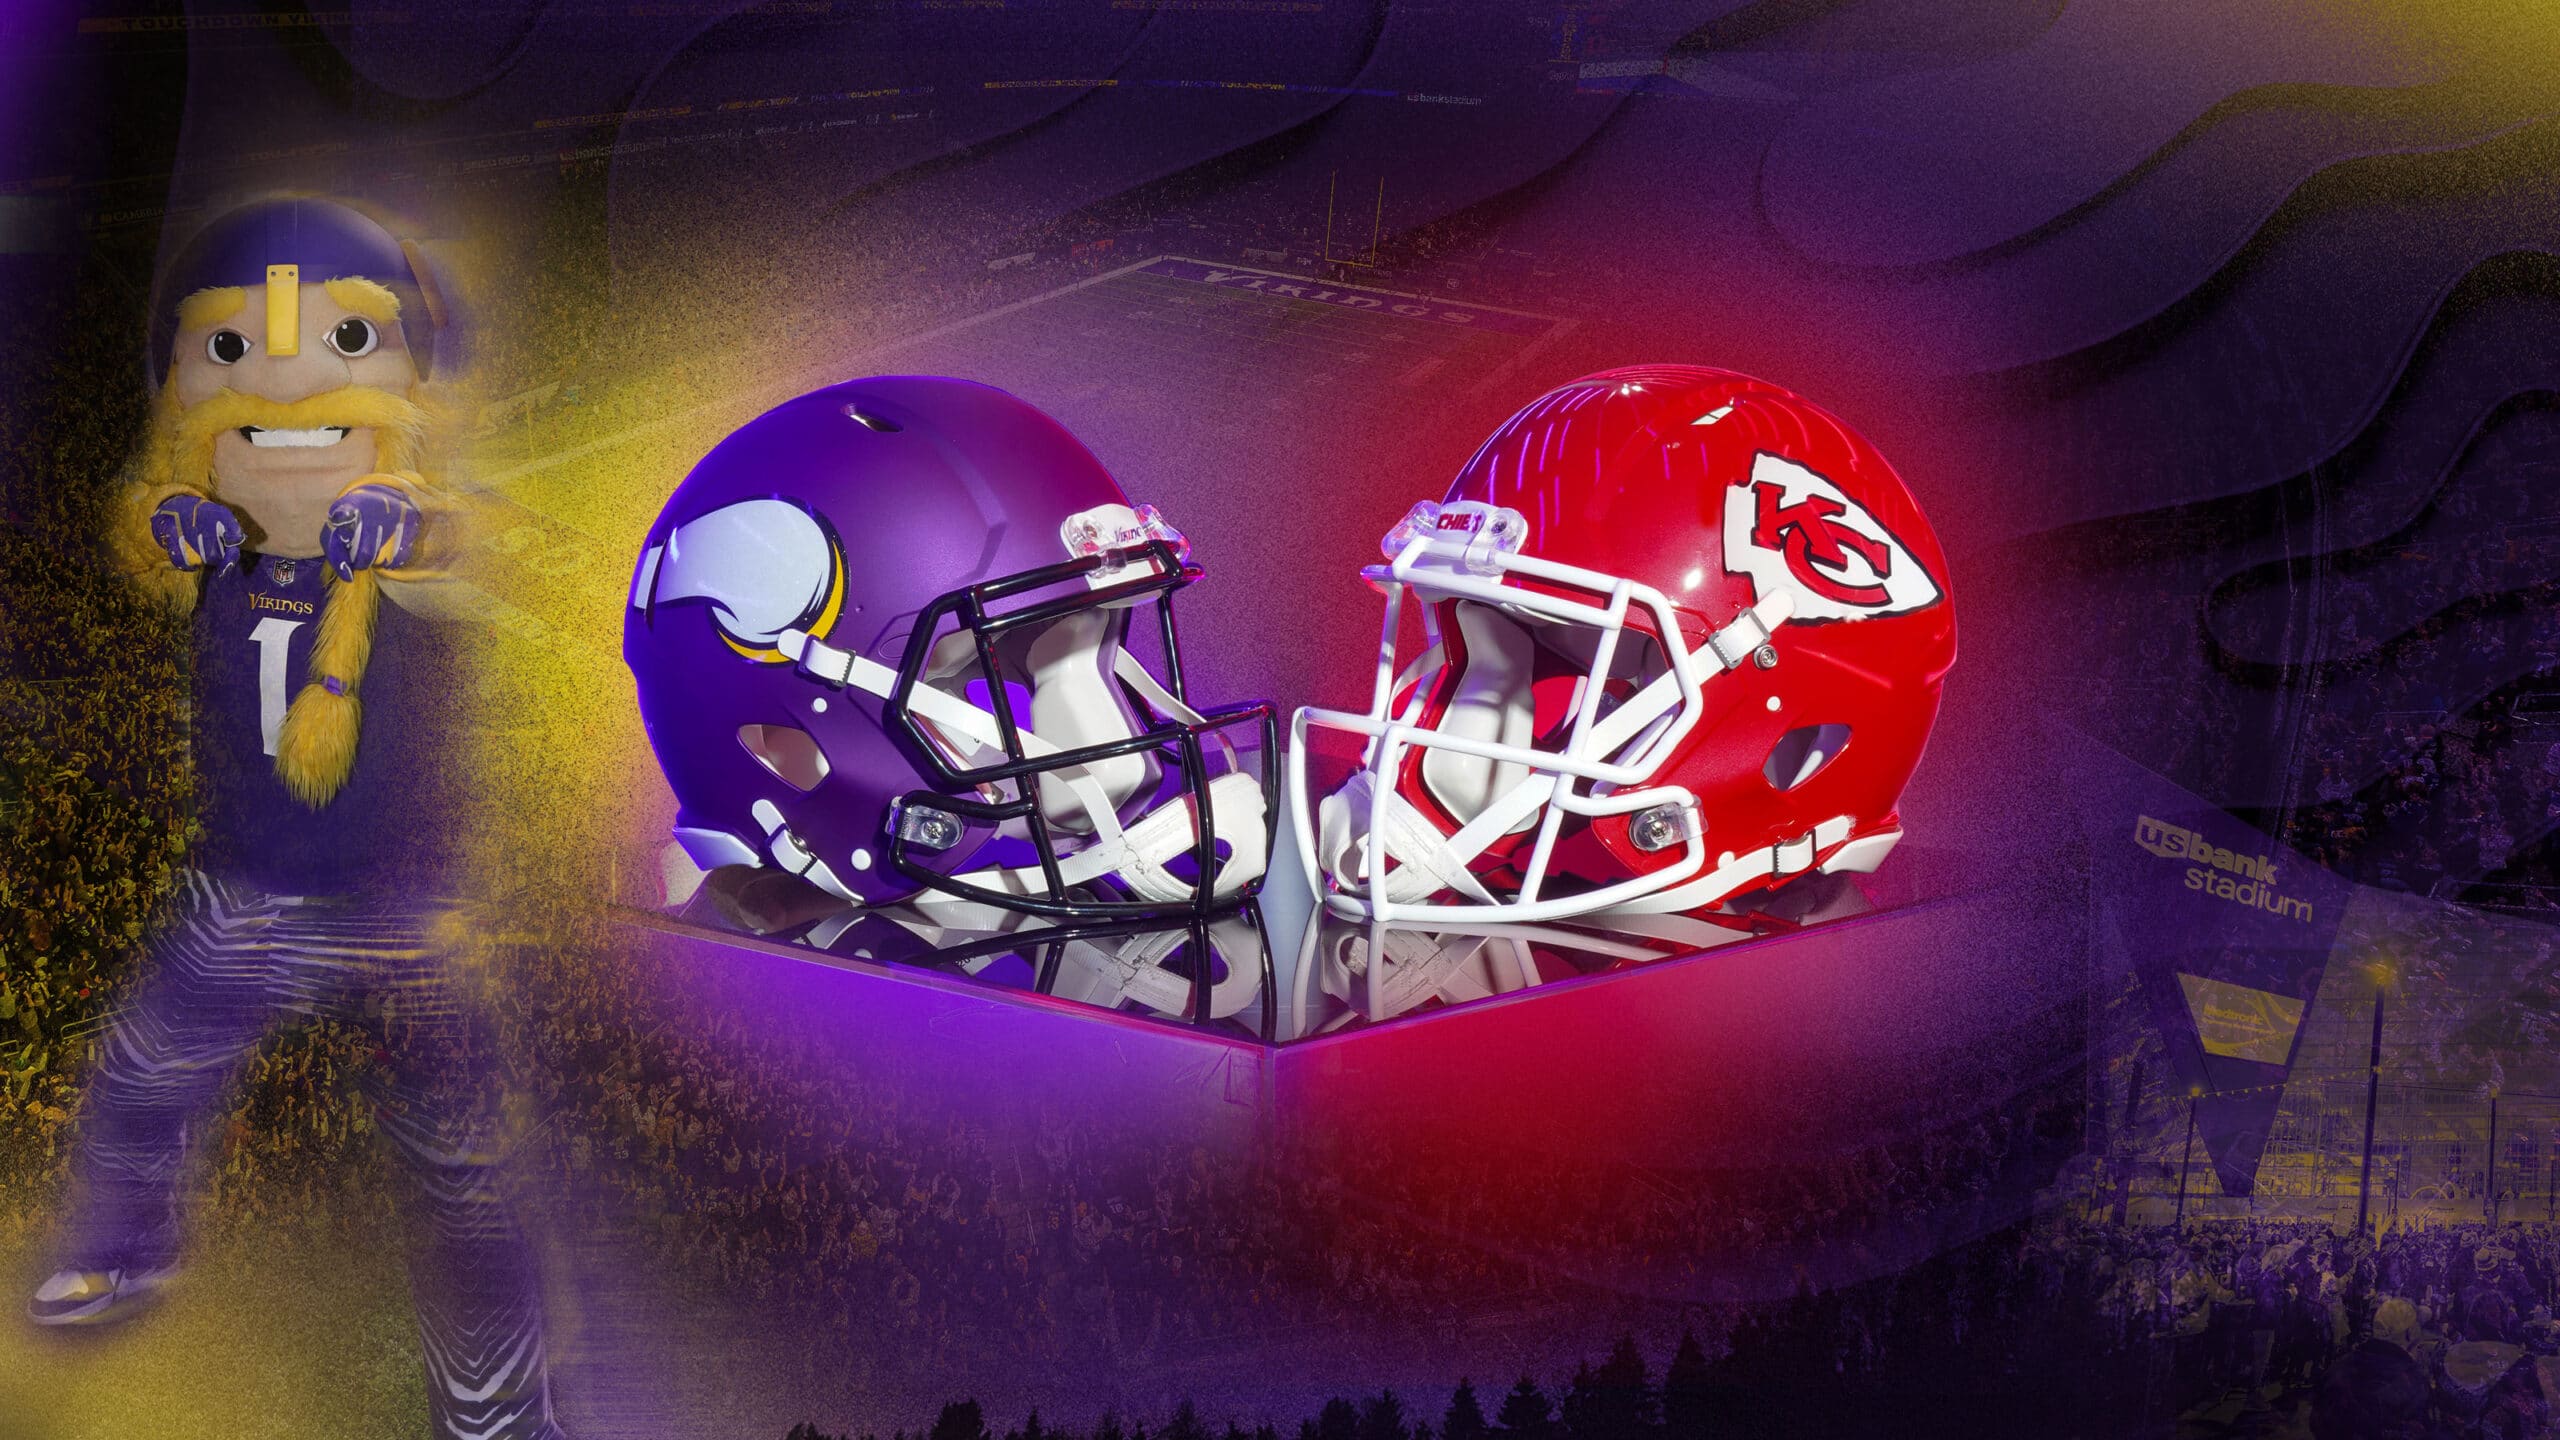 Win VIP Tickets & Field Access at the Vikings vs. Chiefs Game - Alltroo